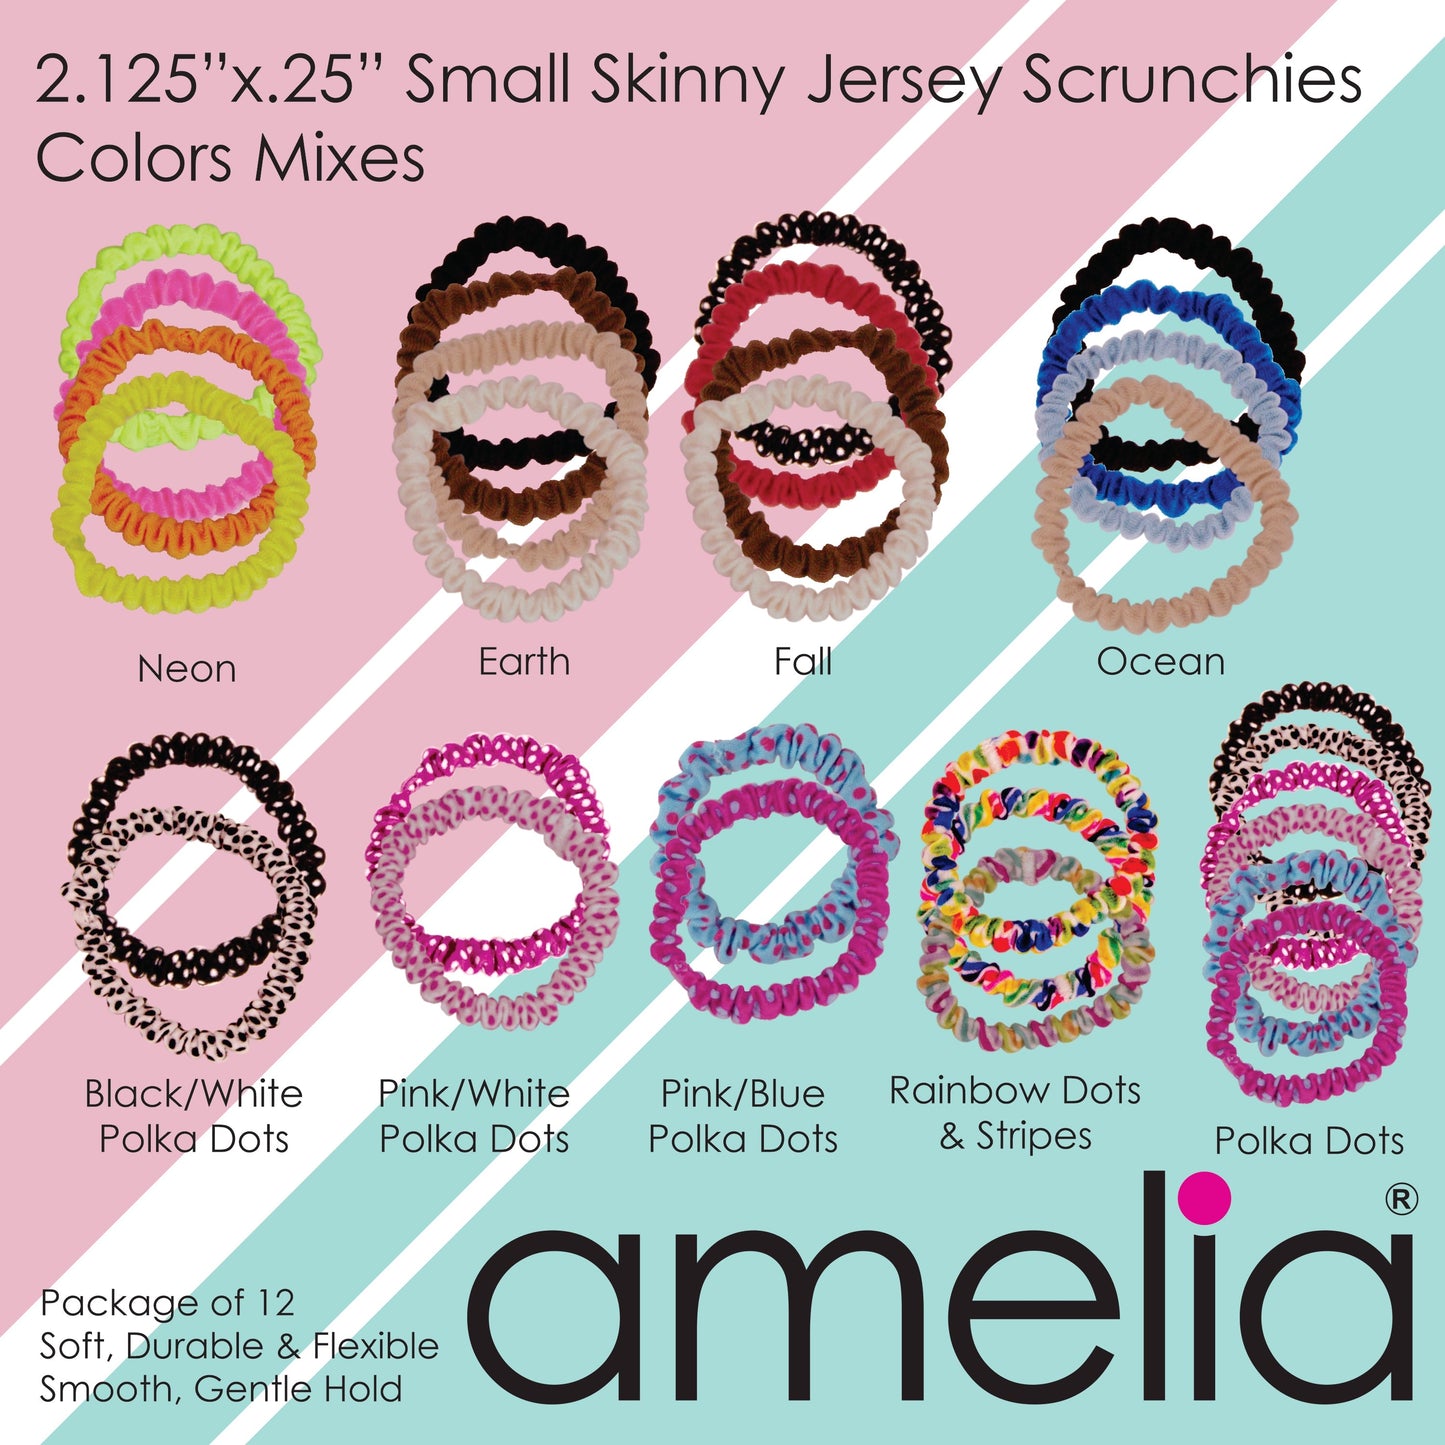 Amelia Beauty, White Skinny Jersey Scrunchies, 2.125in Diameter, Gentle on Hair, Strong Hold, No Snag, No Dents or Creases. 12 Pack - 12 Retail Packs